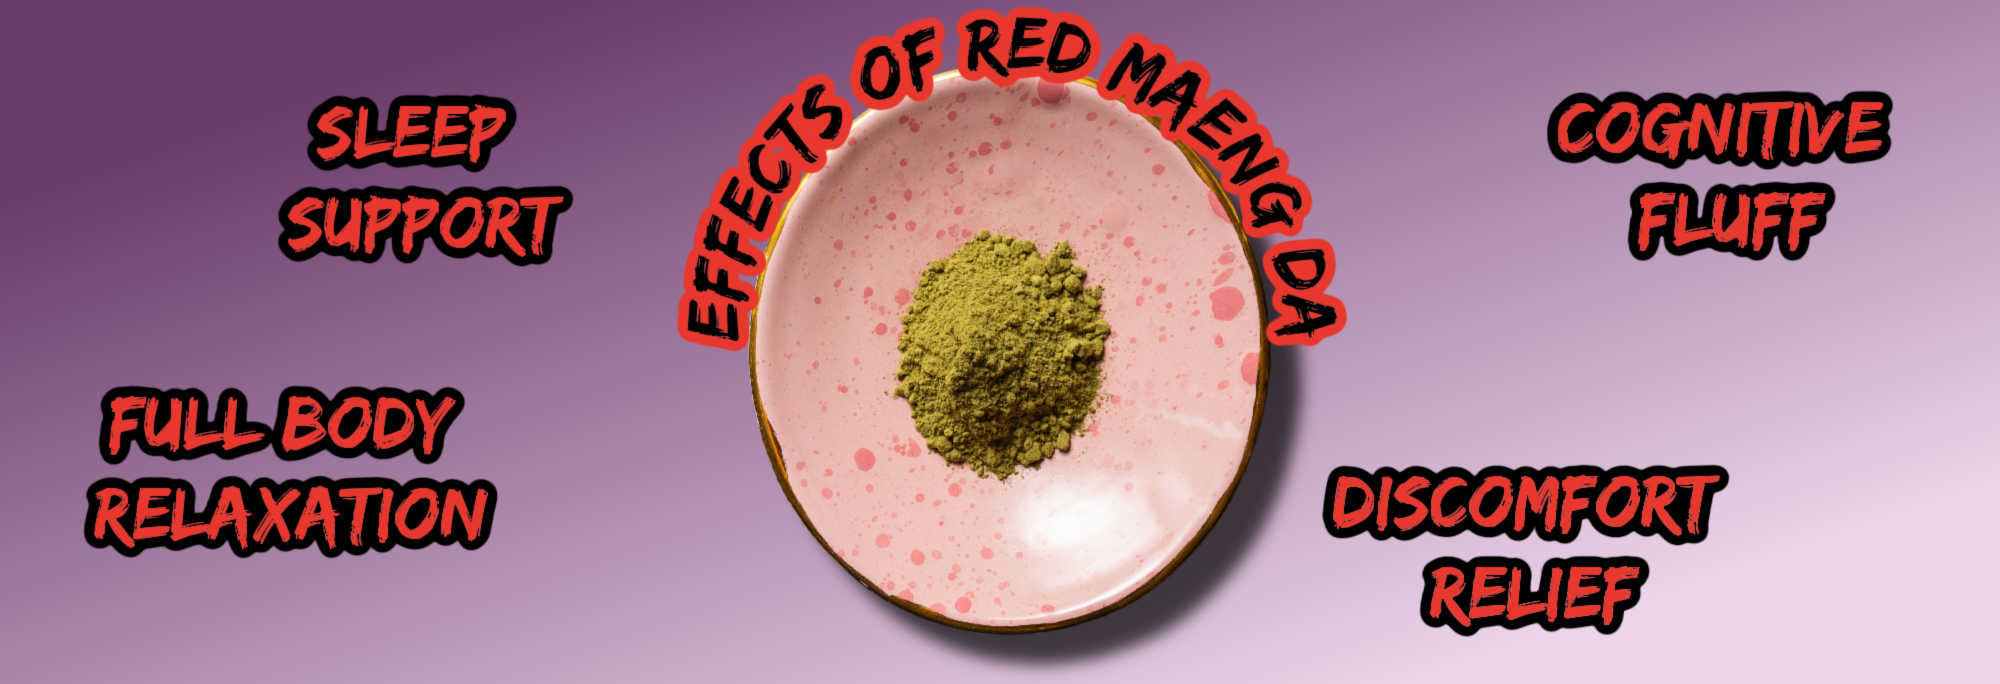 image of red maeng da effects